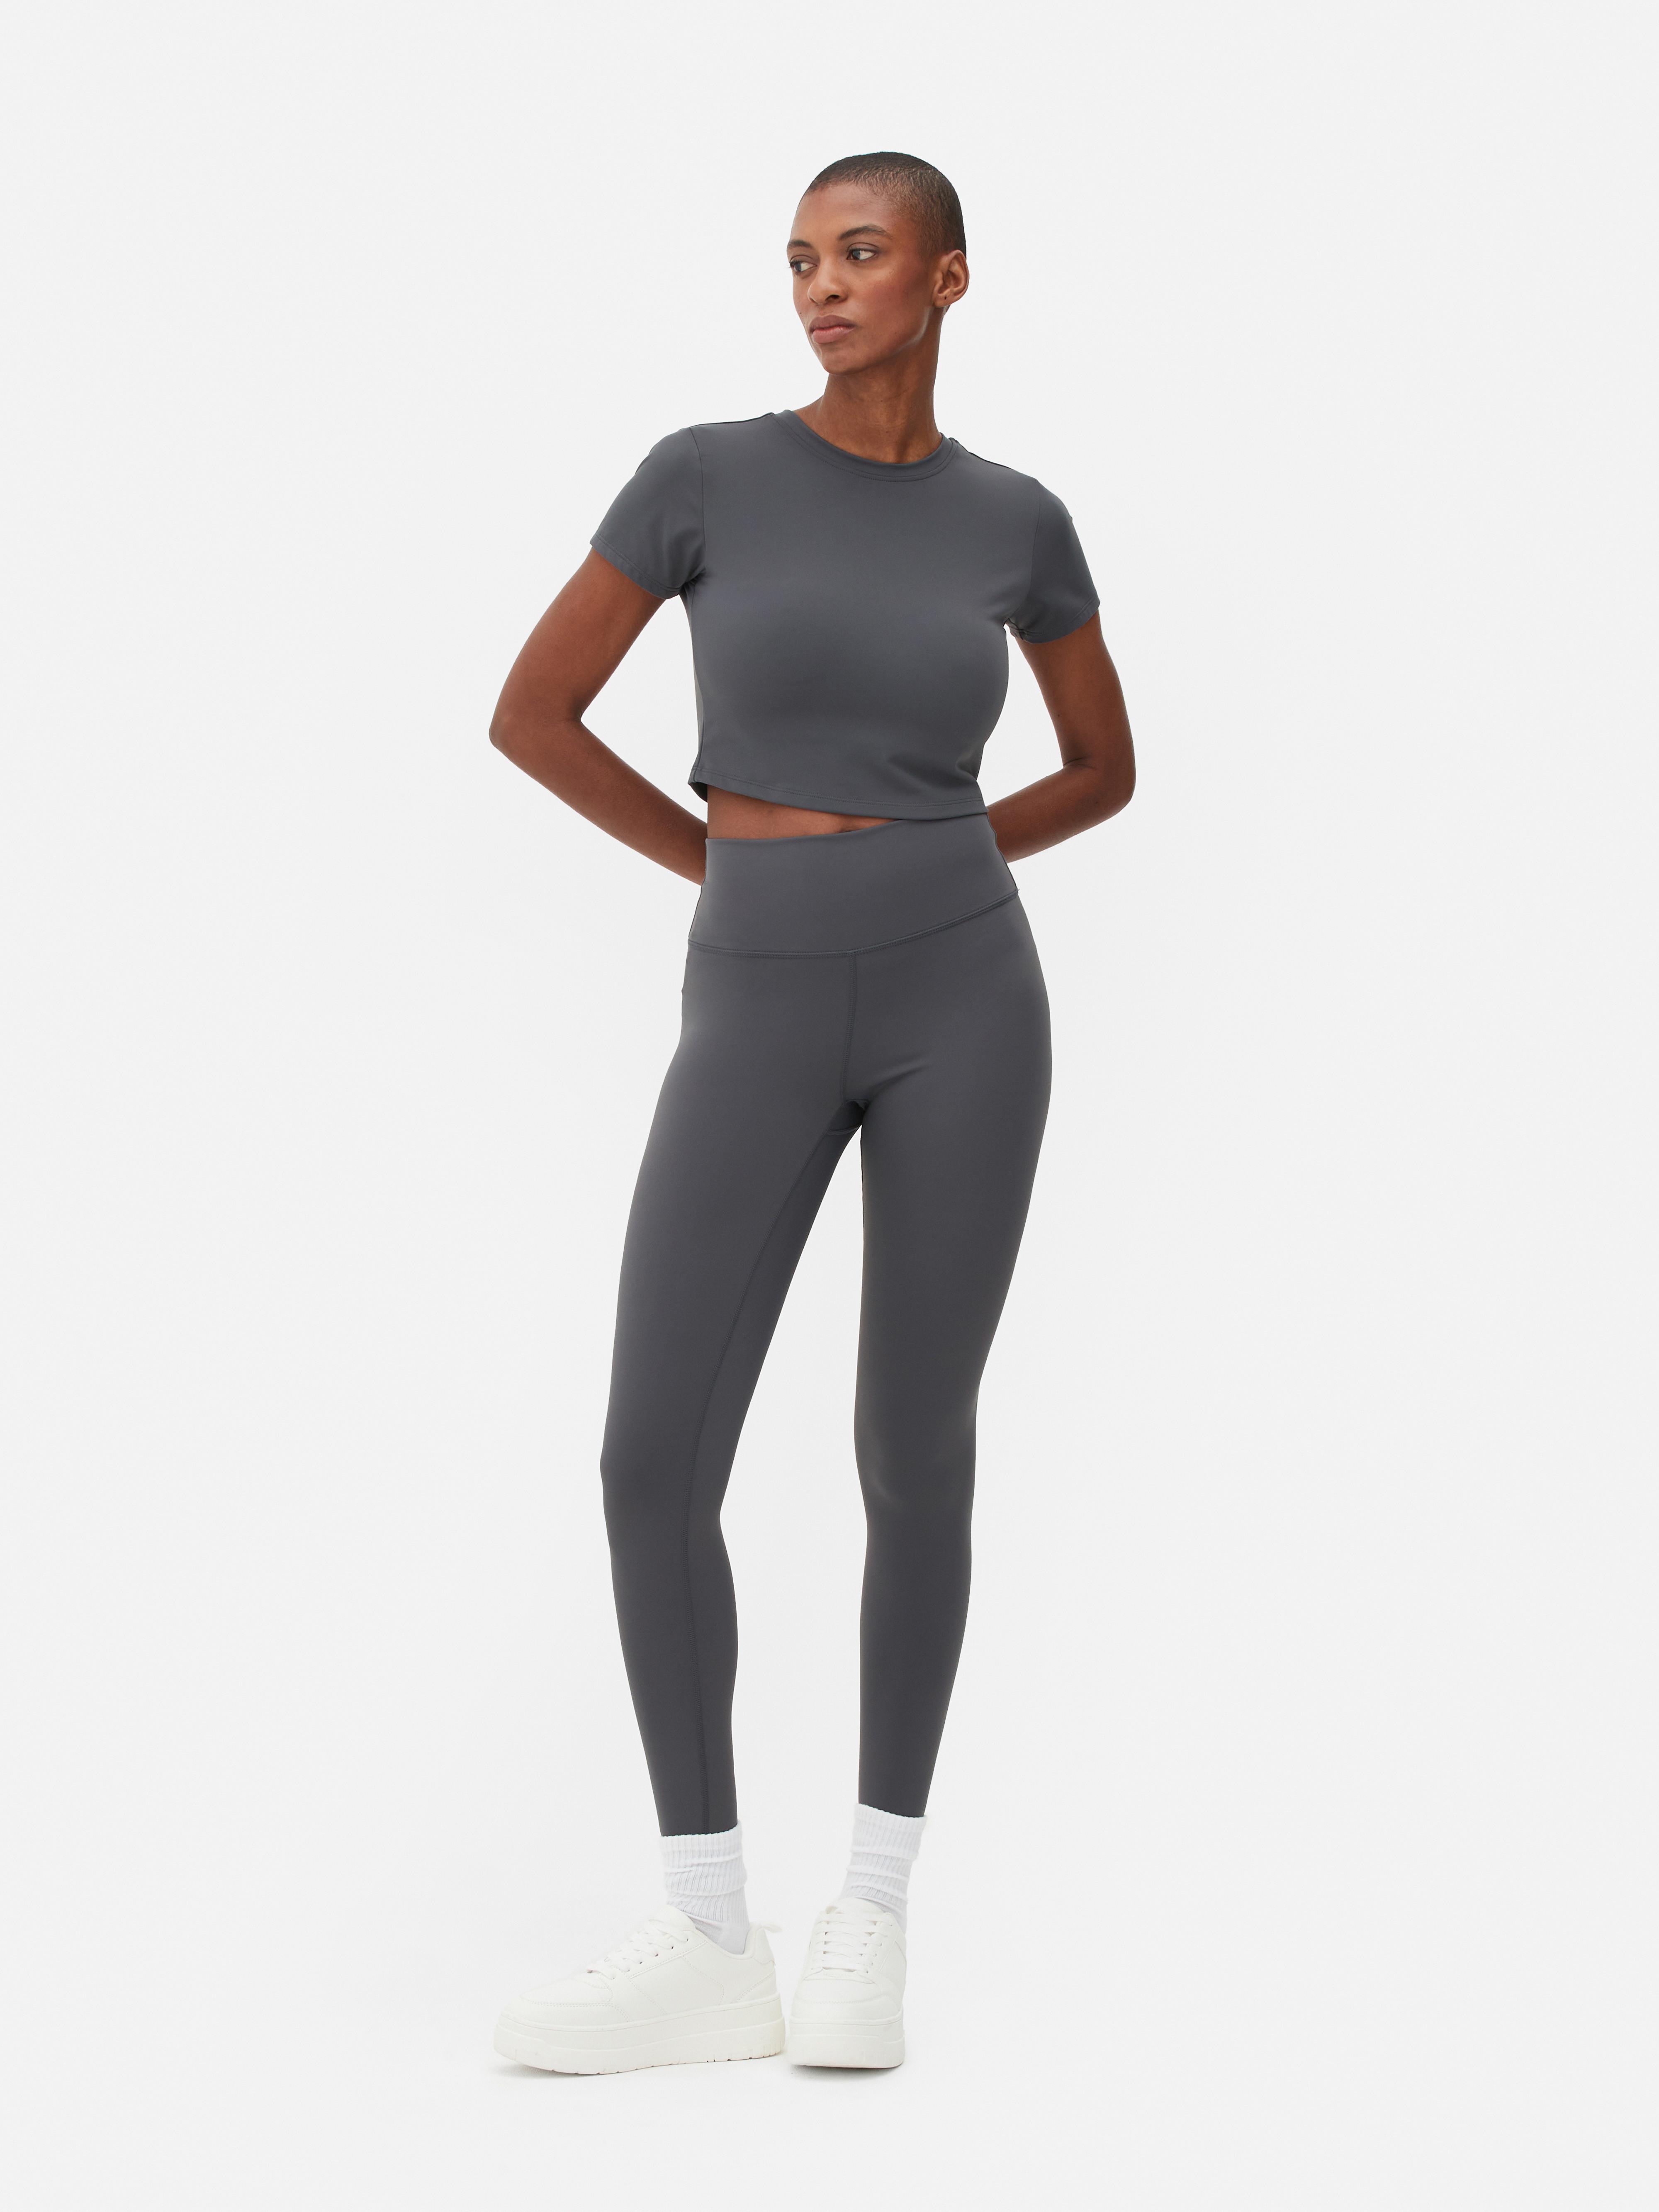 Women's Sportswear, Workout Clothes & Activewear Sets